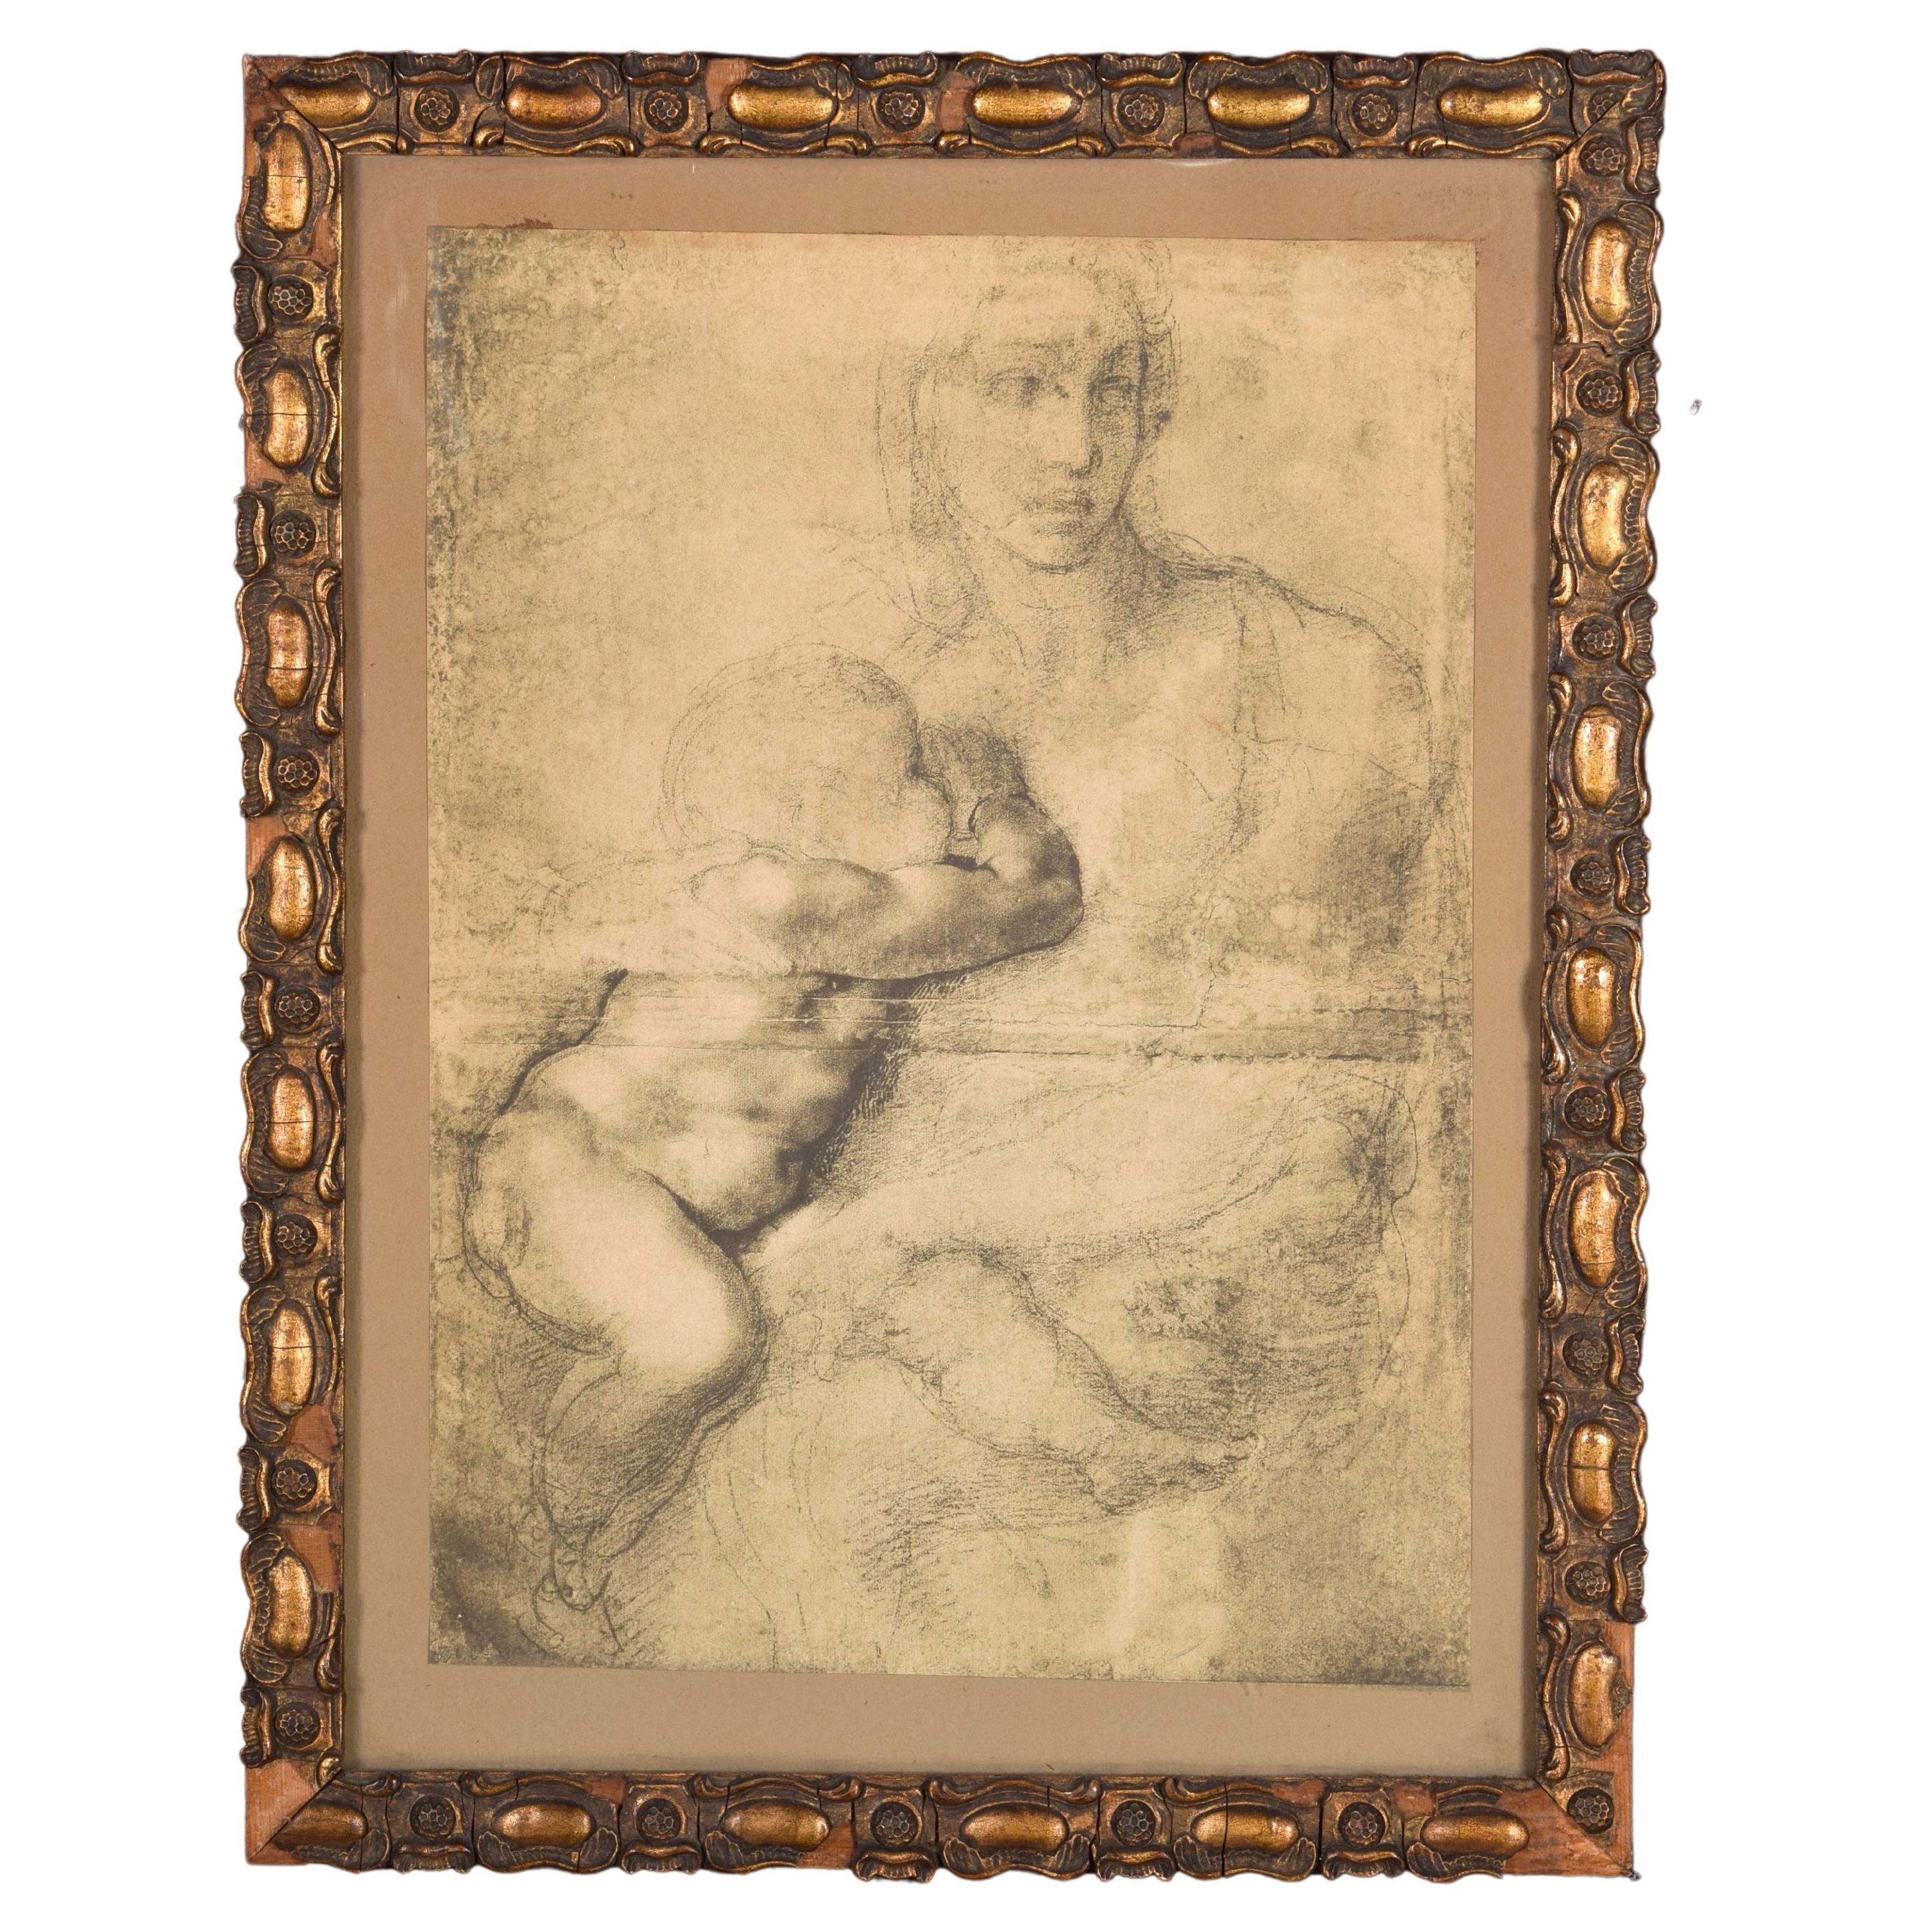 Virgin with Child, Framed Print, 20th Century, After Michelangelo